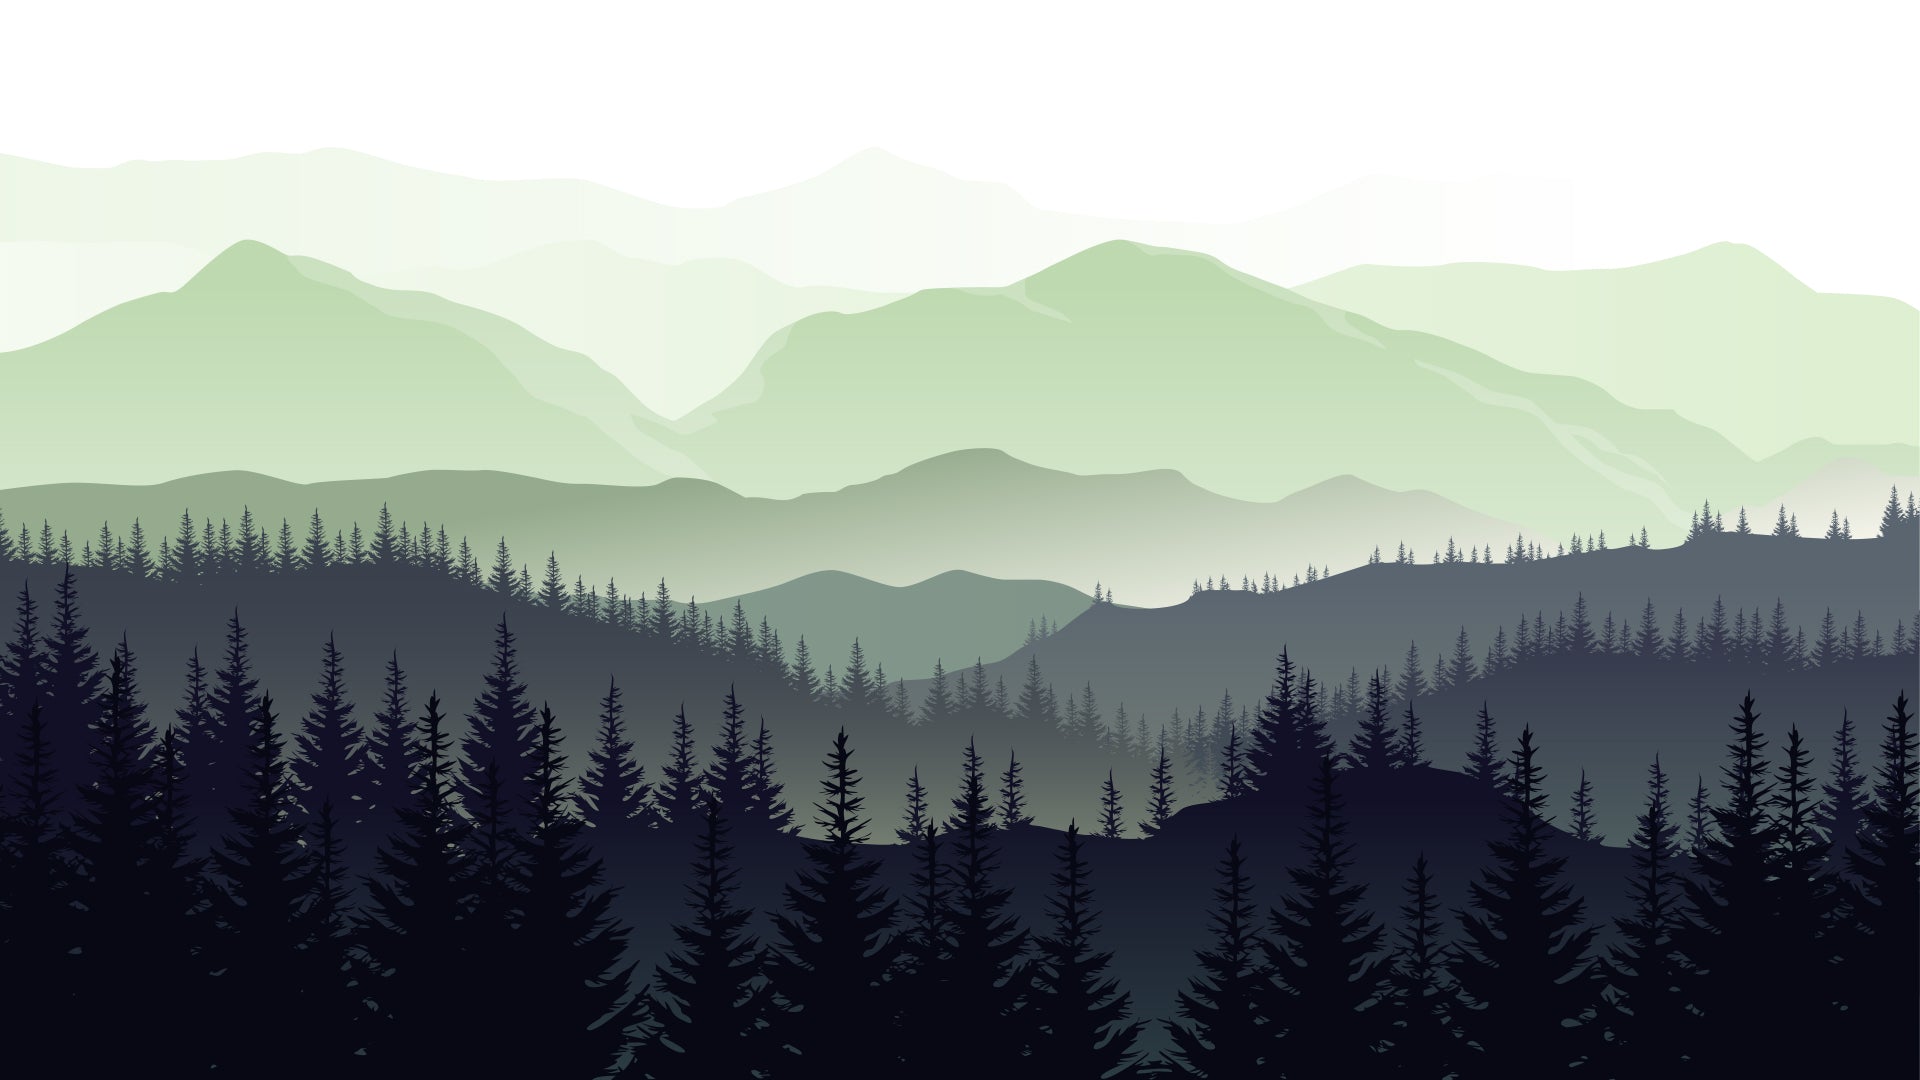 An illustration of rolling green hills and evergreen eastern white pine trees.